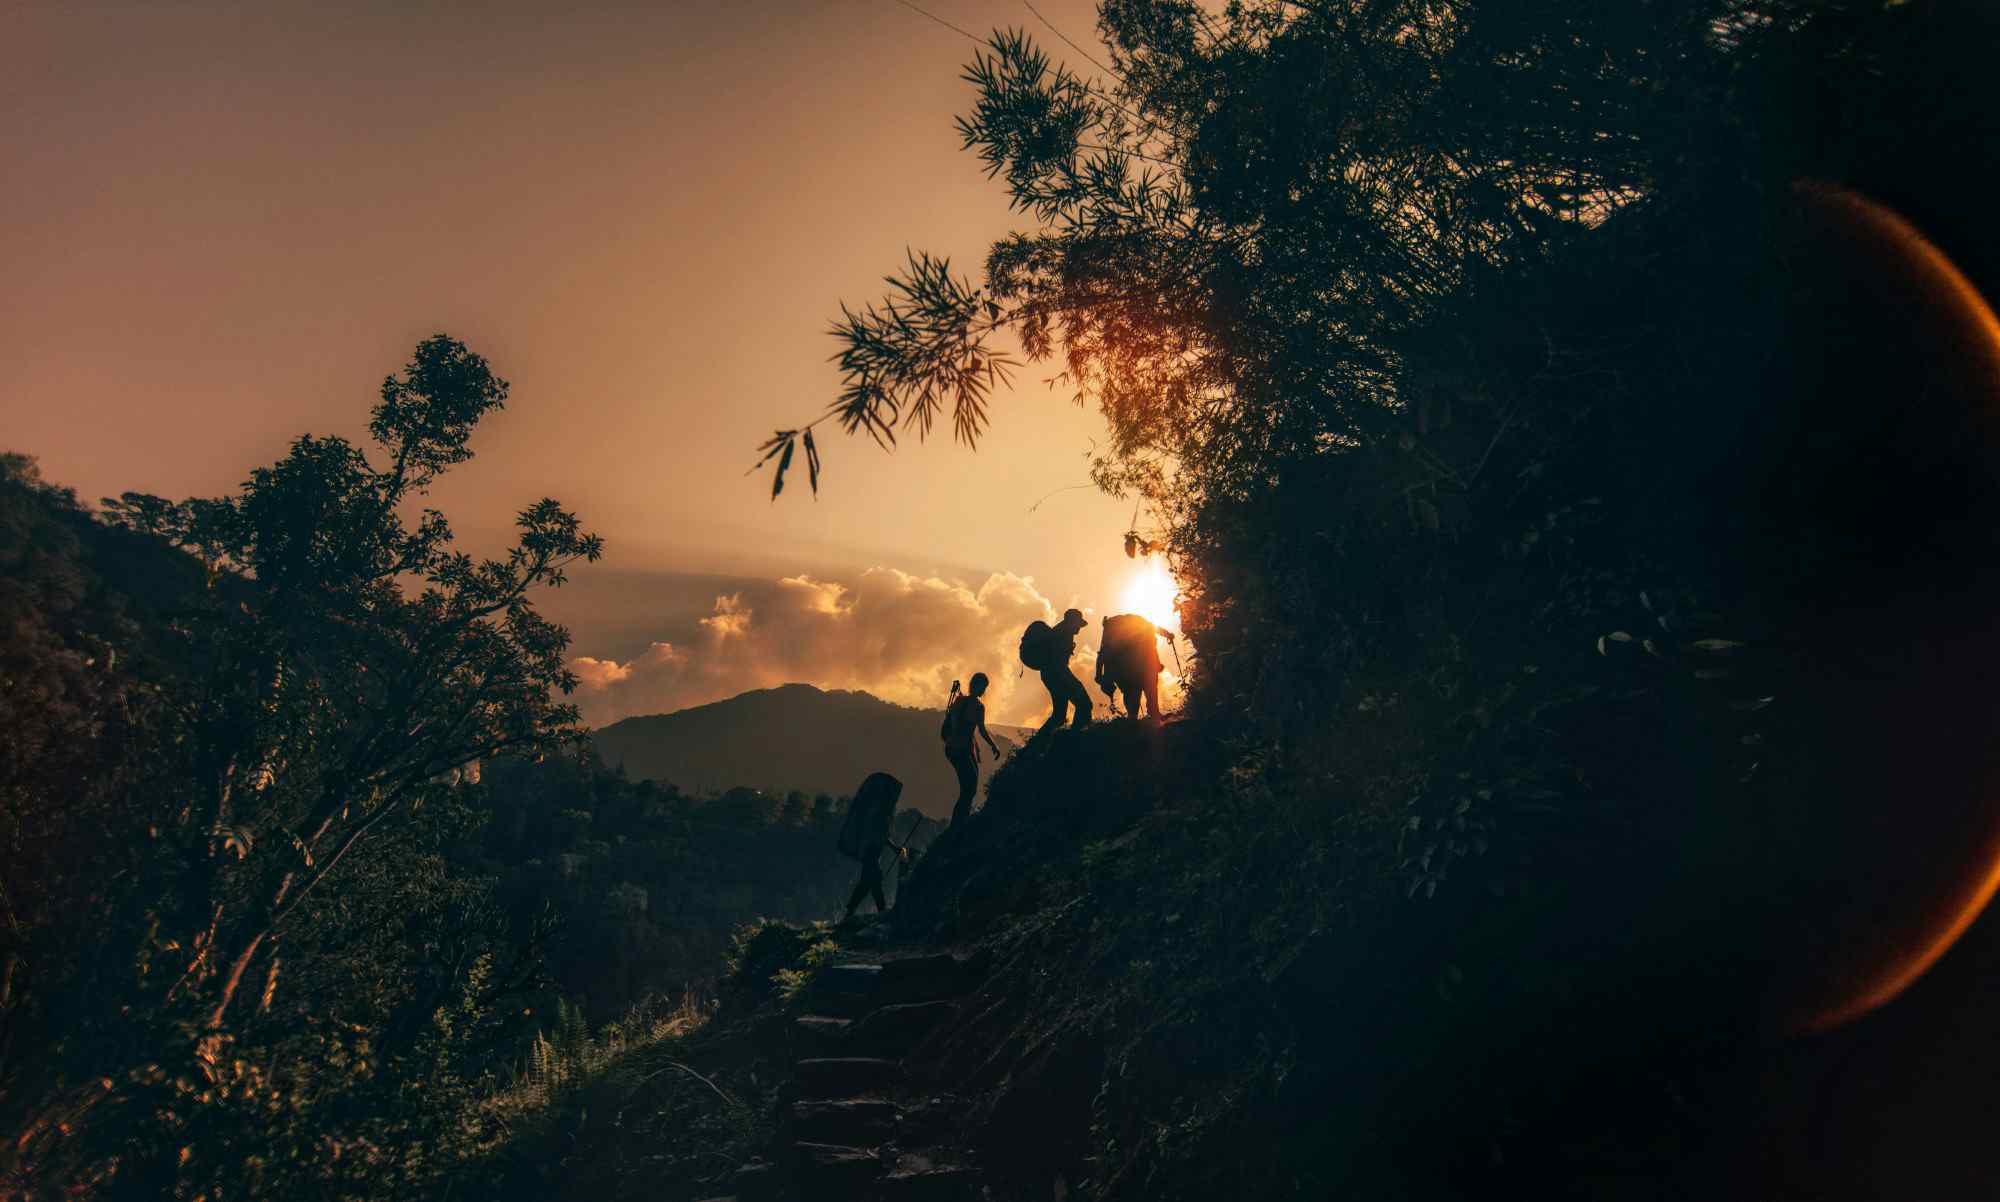 Hikers climbing up the steps through the jungle of Annapurna Range on Himalayas, Nepal. Photo: GettyImages-521430248
